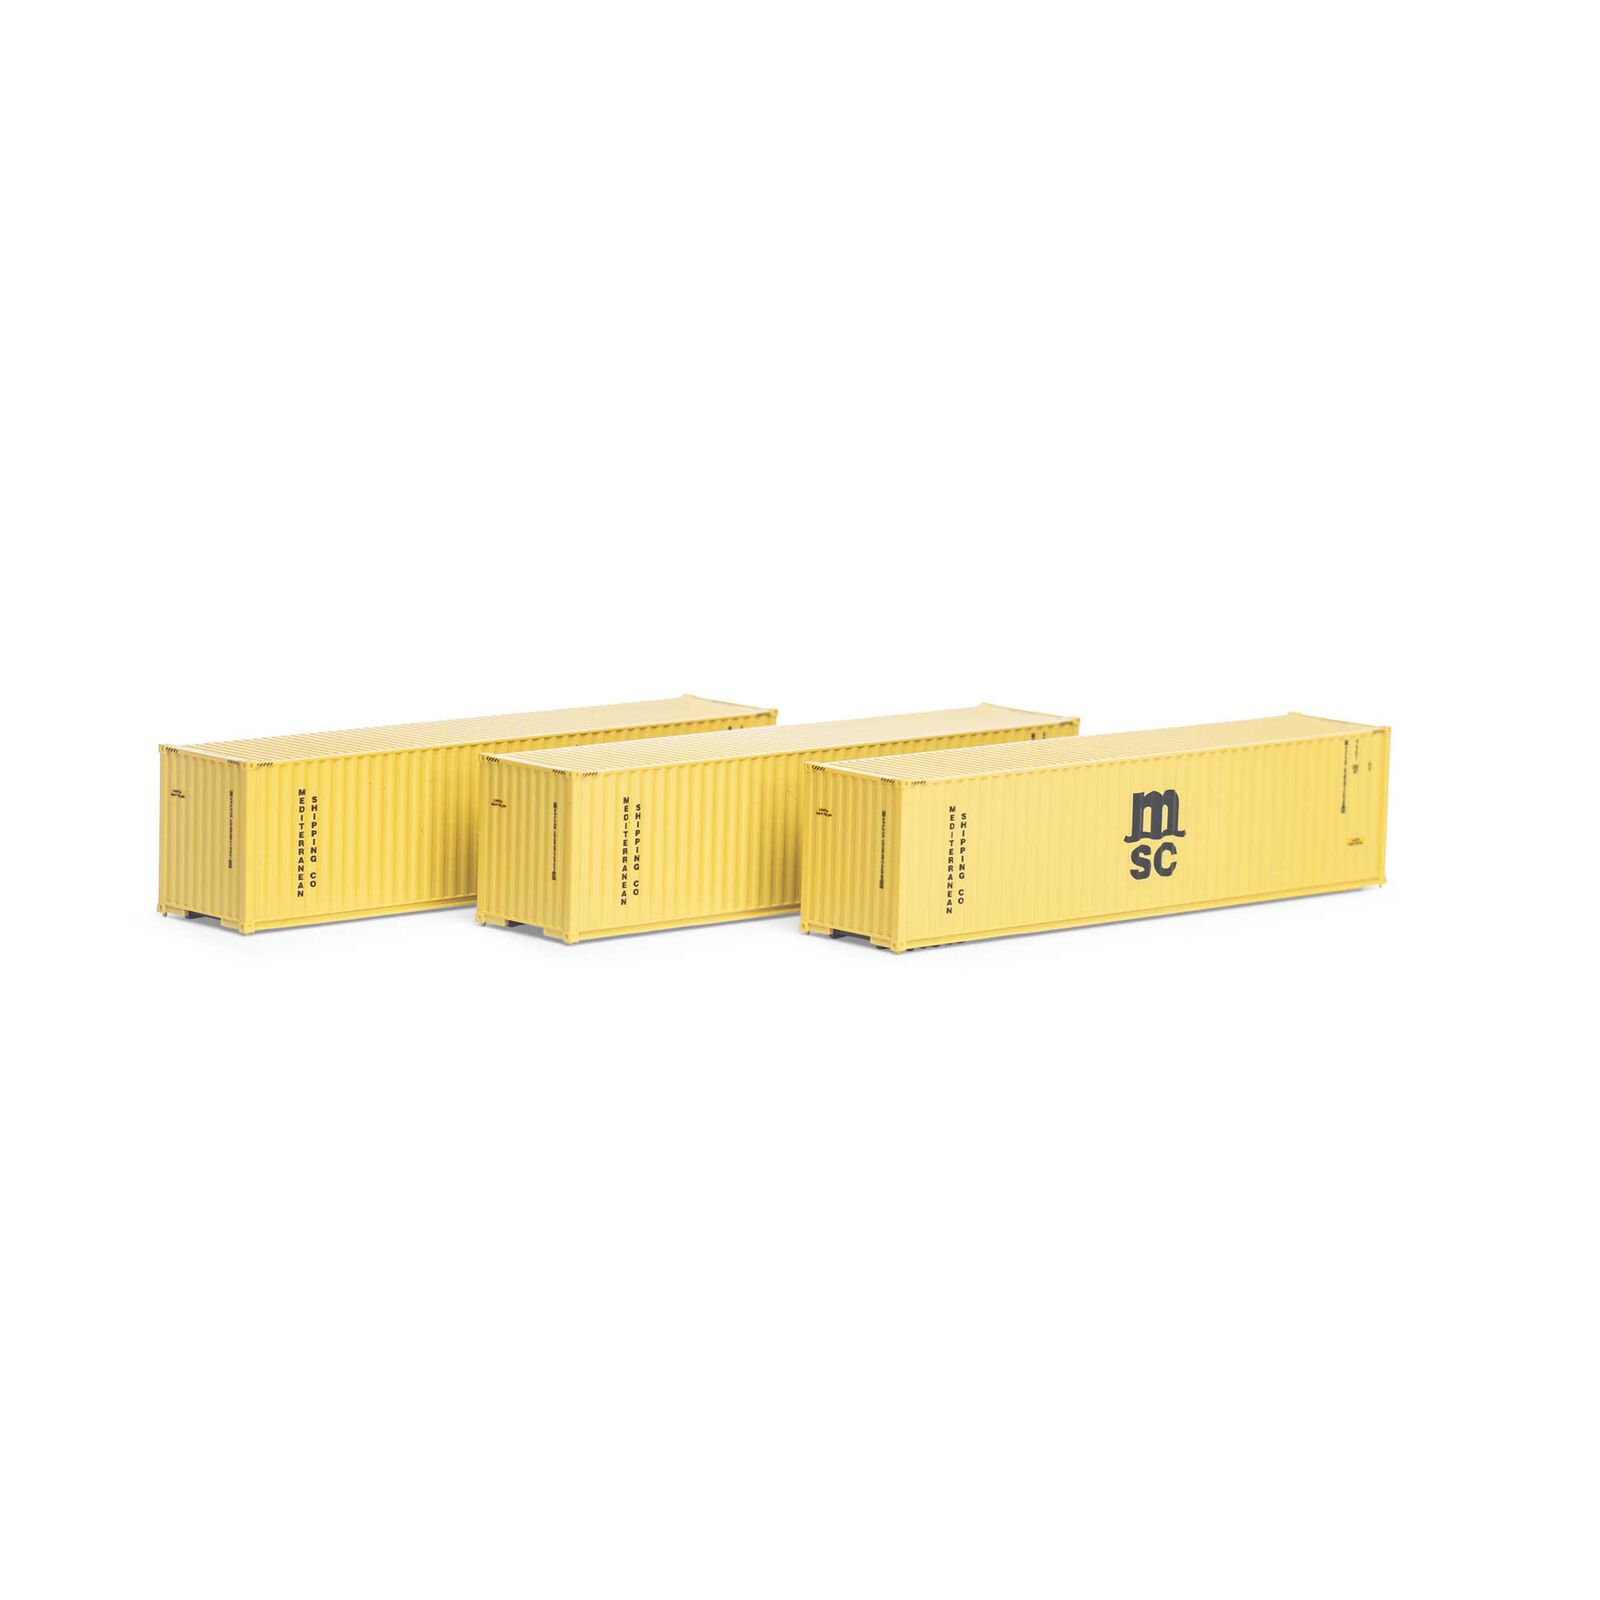 N 40' Corrugated HC Container, MSC/Yellow #1 (3)